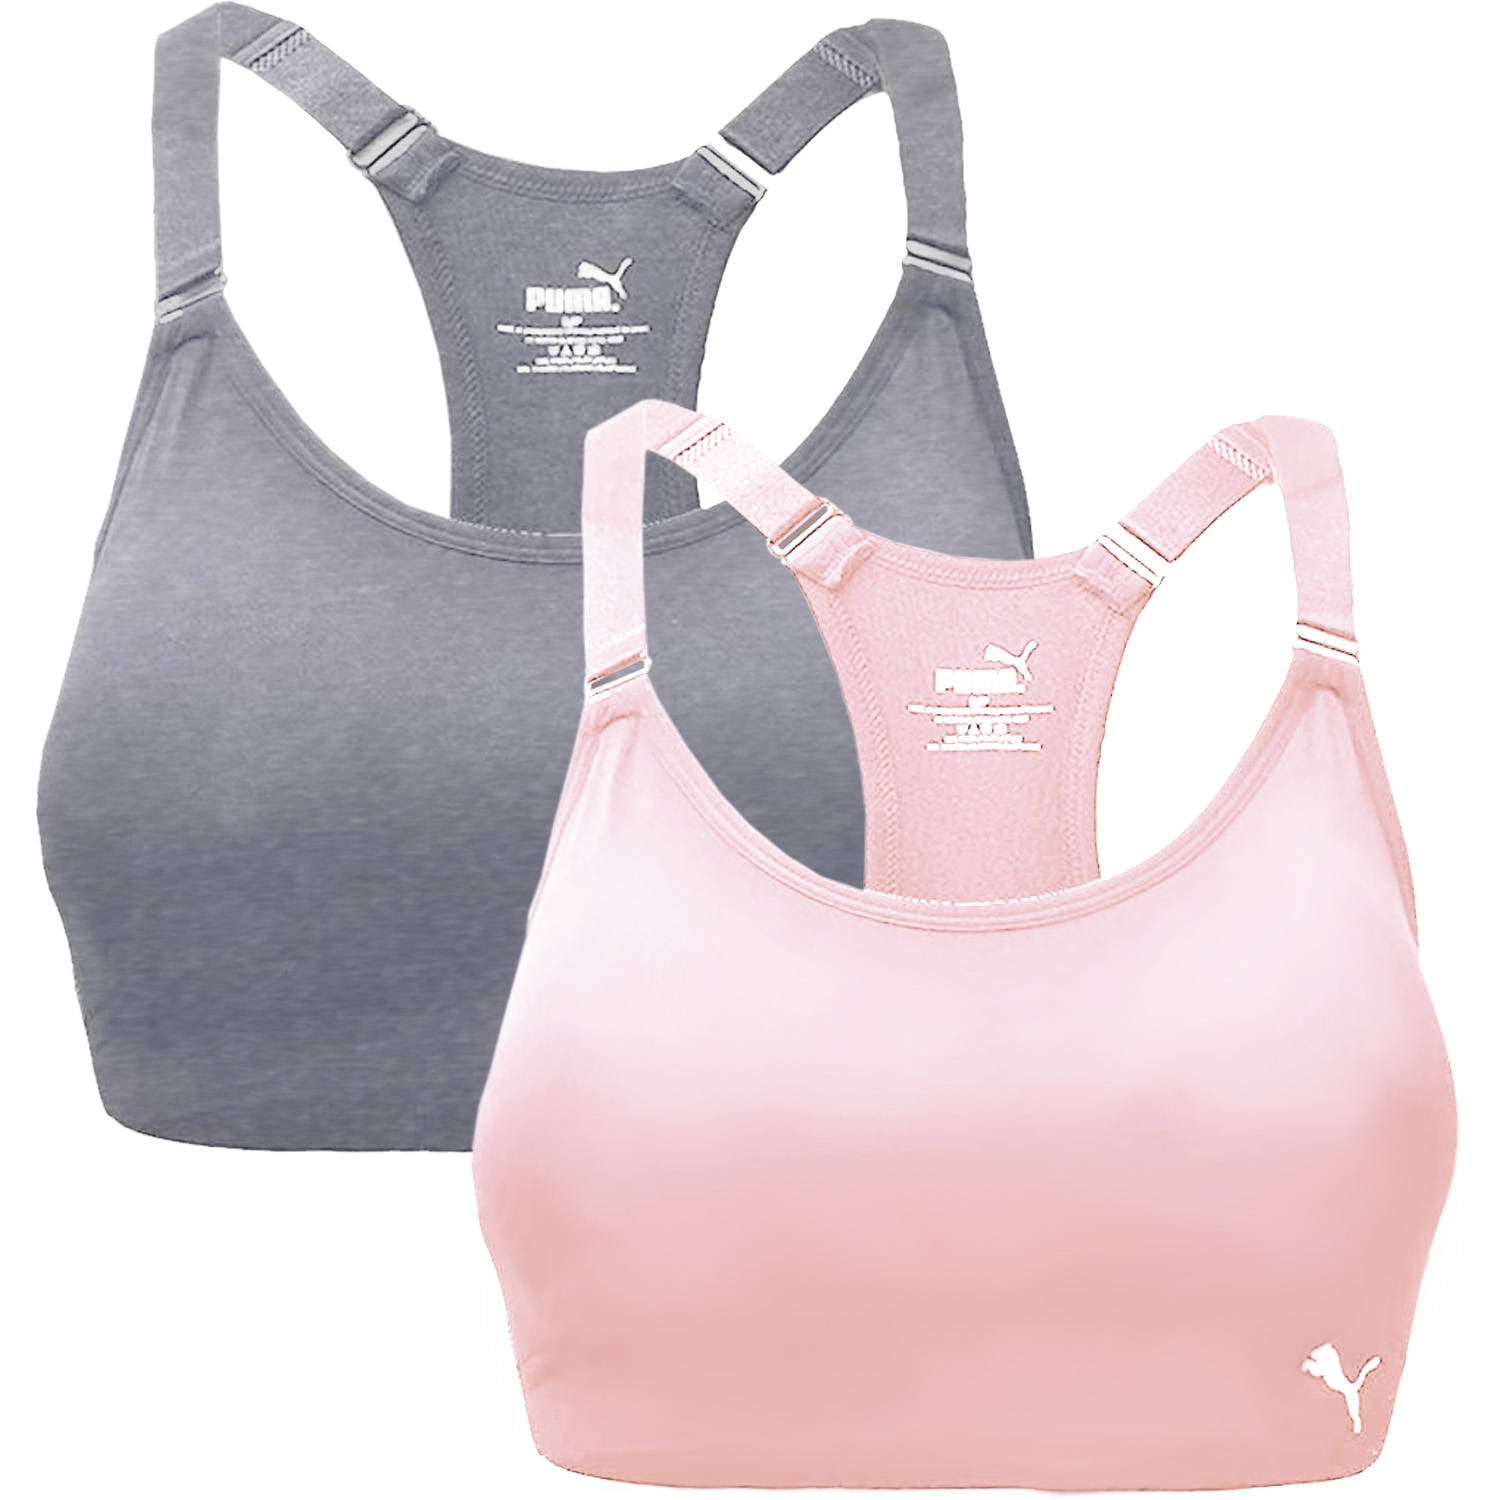 Puma Women's Sports Bra 2 Pack Seamless Removable Cups Size: XL, Color:  White/Dark Pink